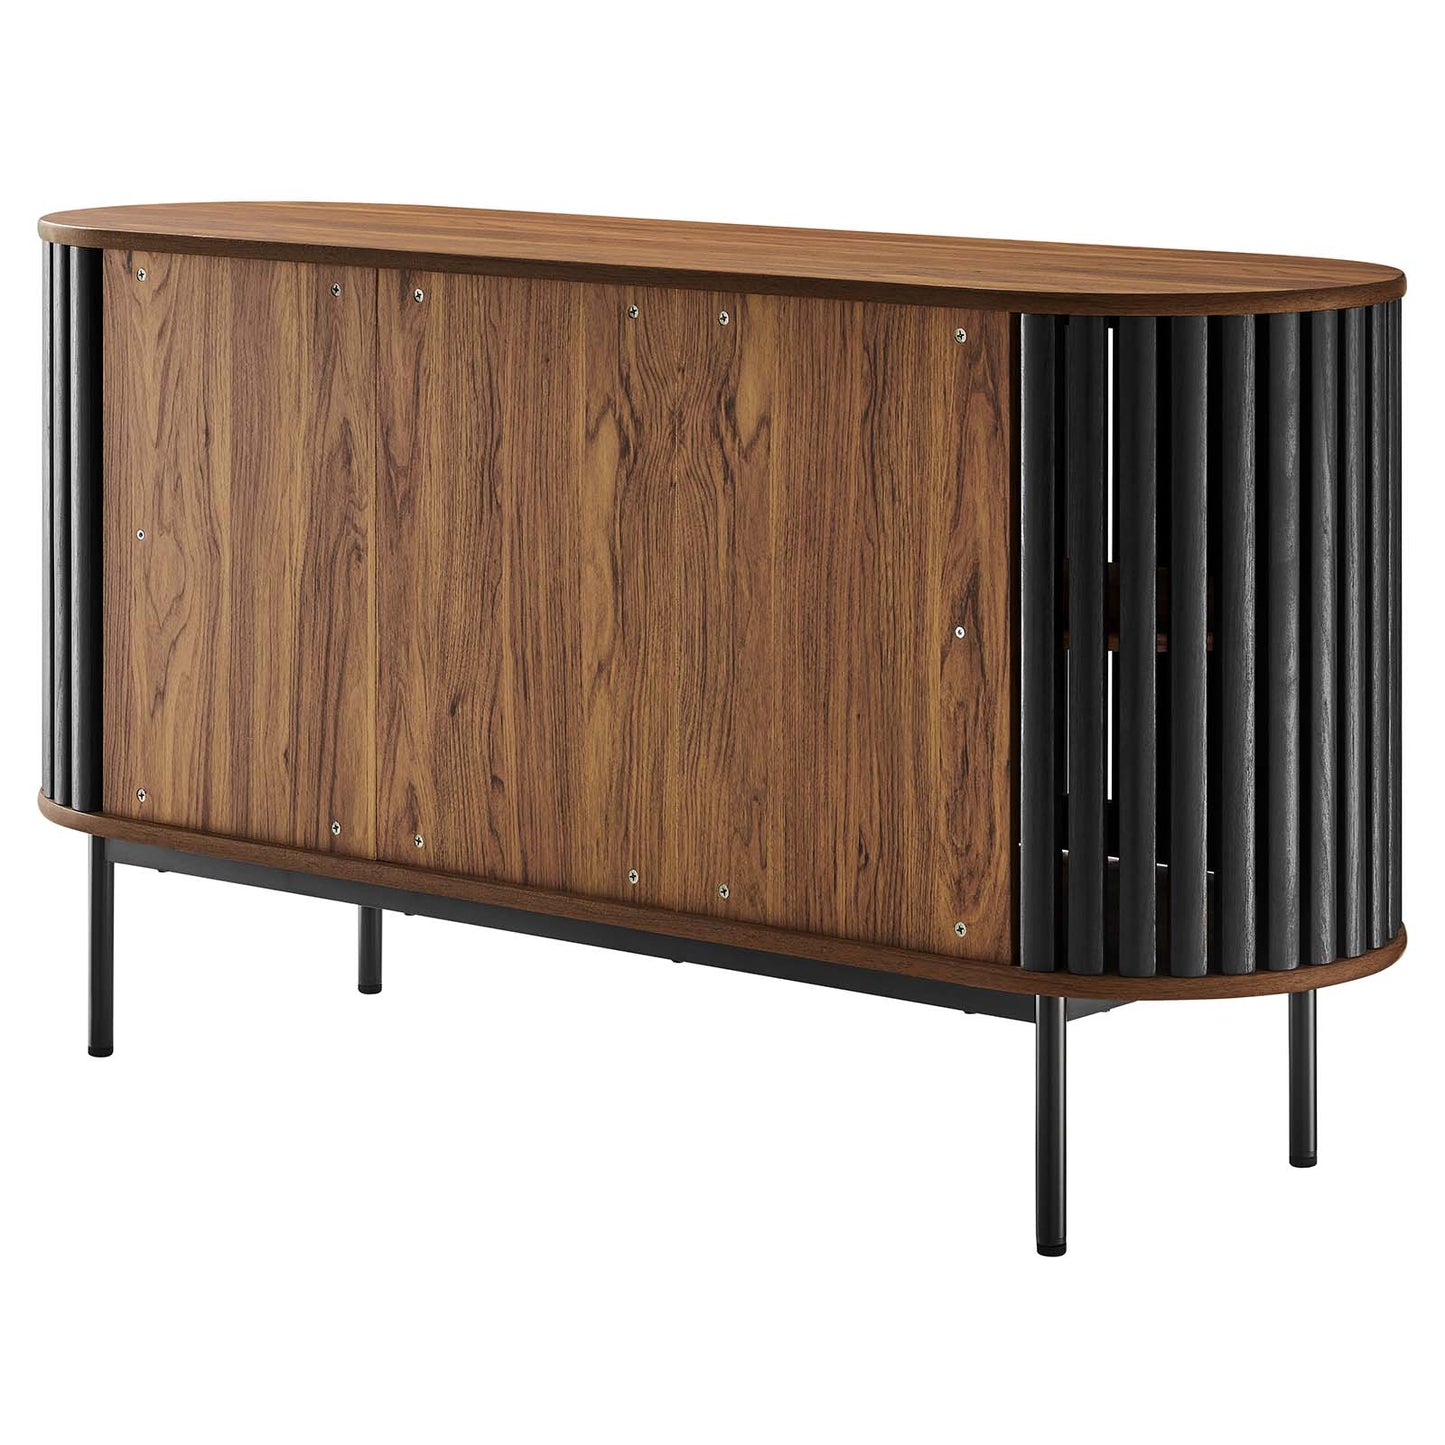 Fortitude 59” Oval Sideboard By Modway - EEI-6590 | Sideboards | Modway - 15